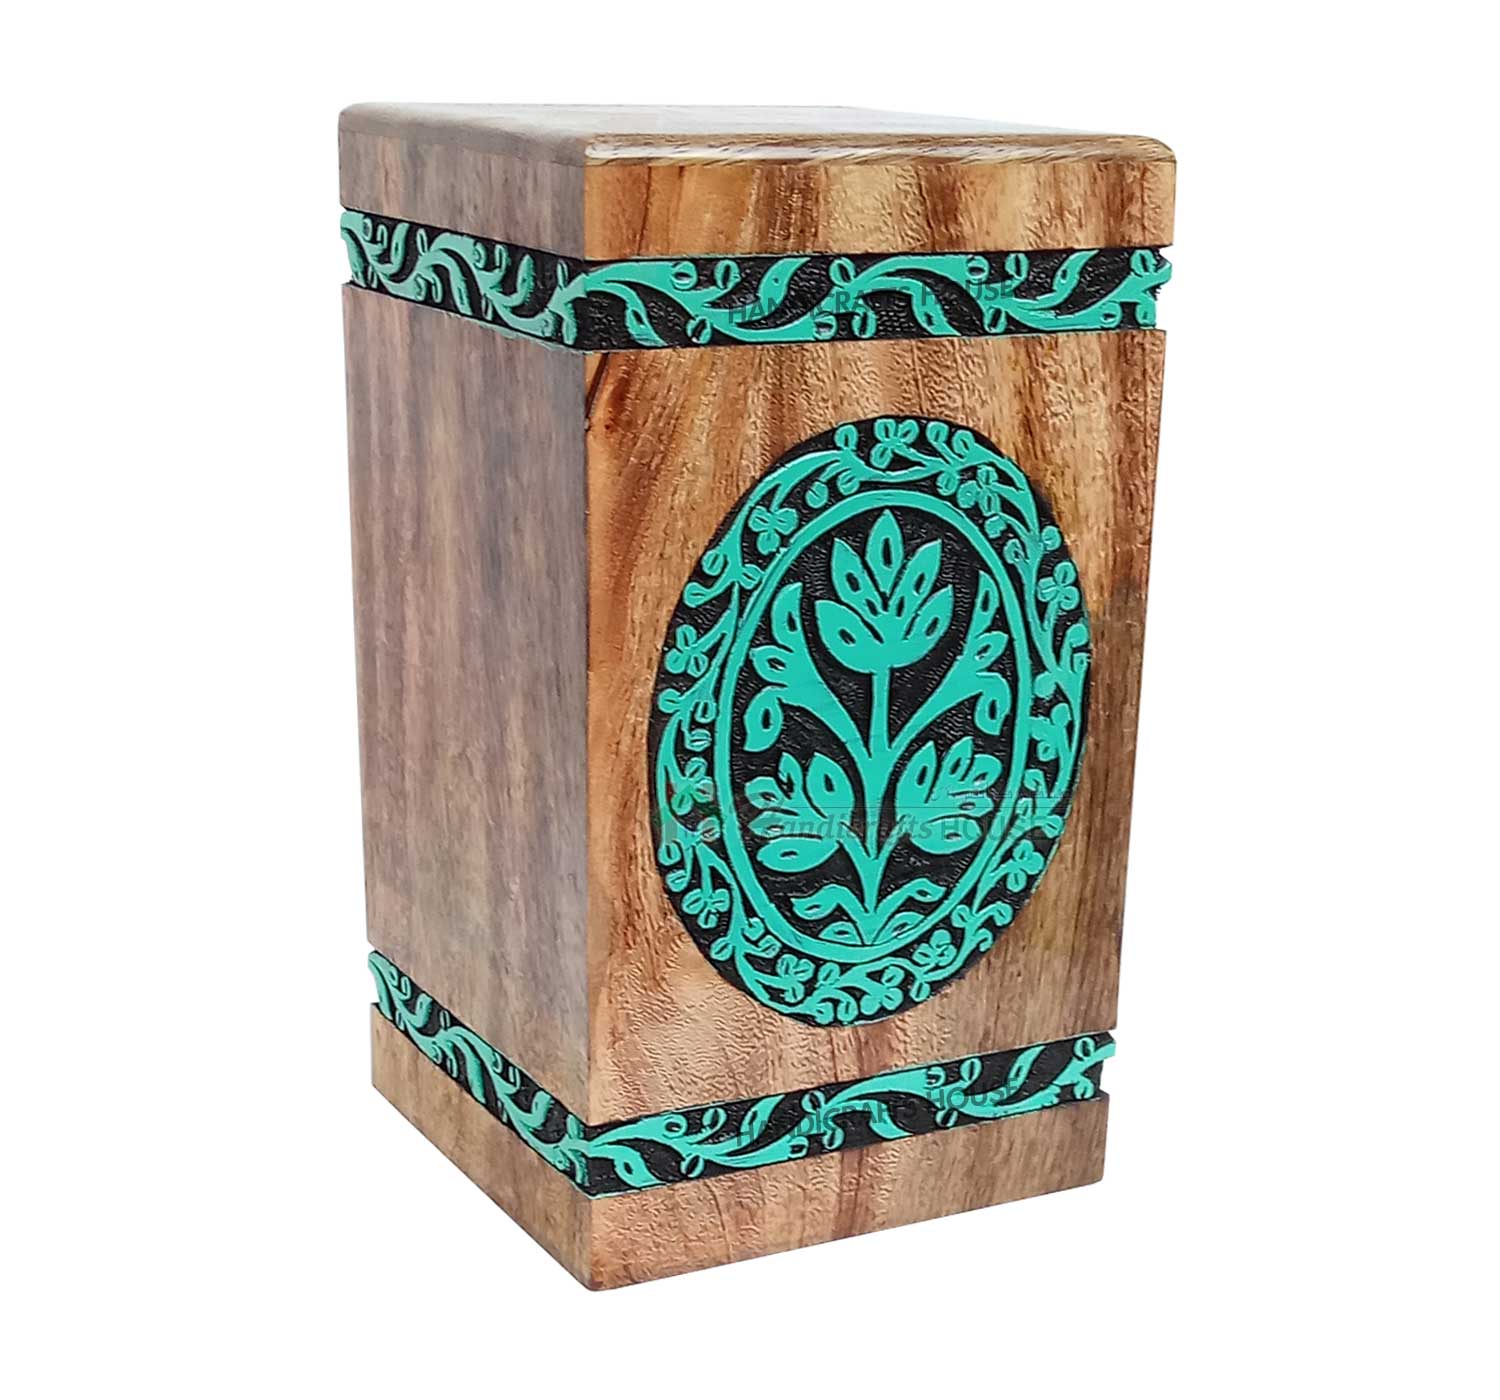 Wood Funeral Urns, Memorial keepsake, Decorative Boxes, Wooden Urns For Human Ashes, Burial Box